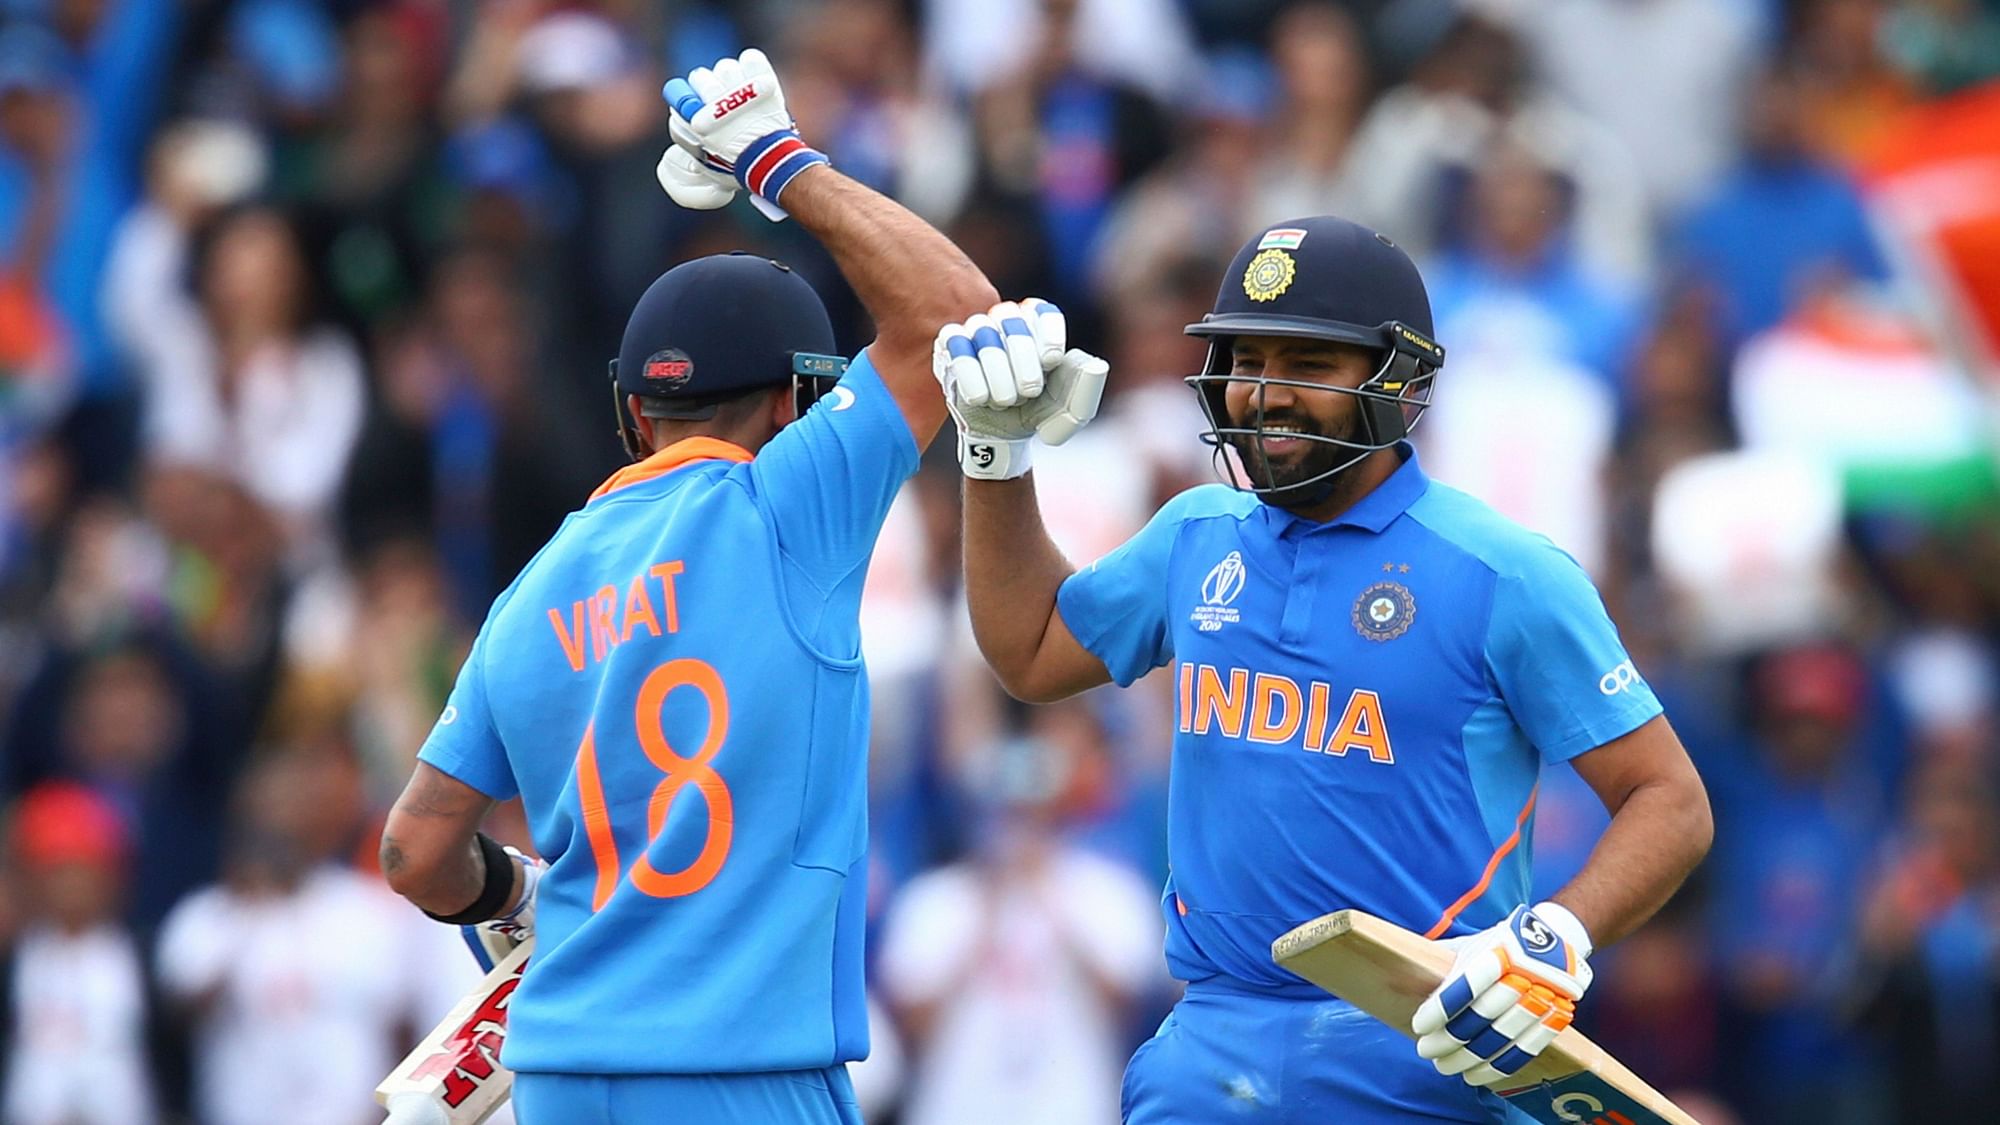 Rohit Sharma’s knock on Sunday would be his 24th hundred in ODI and his 22nd hundred as opening batsman, among others.